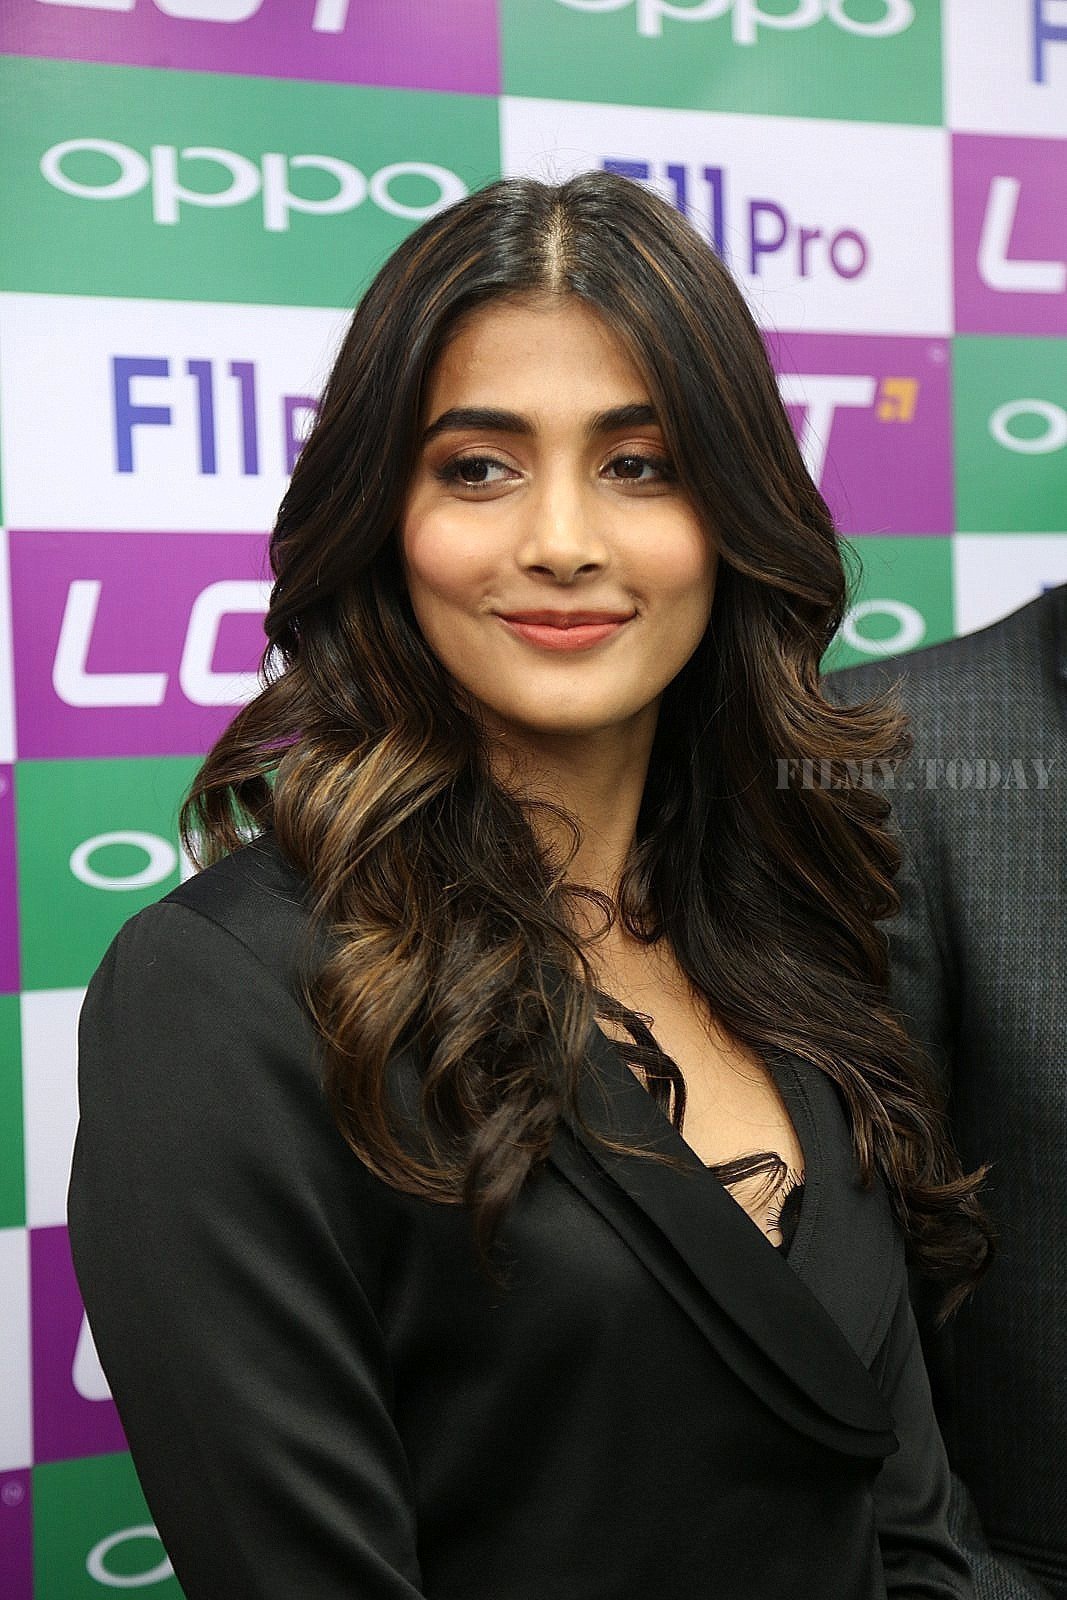 Photos: Pooja Hegde Launched Oppo F11 Pro Mobile At LOT Mobiles | Picture 1635912